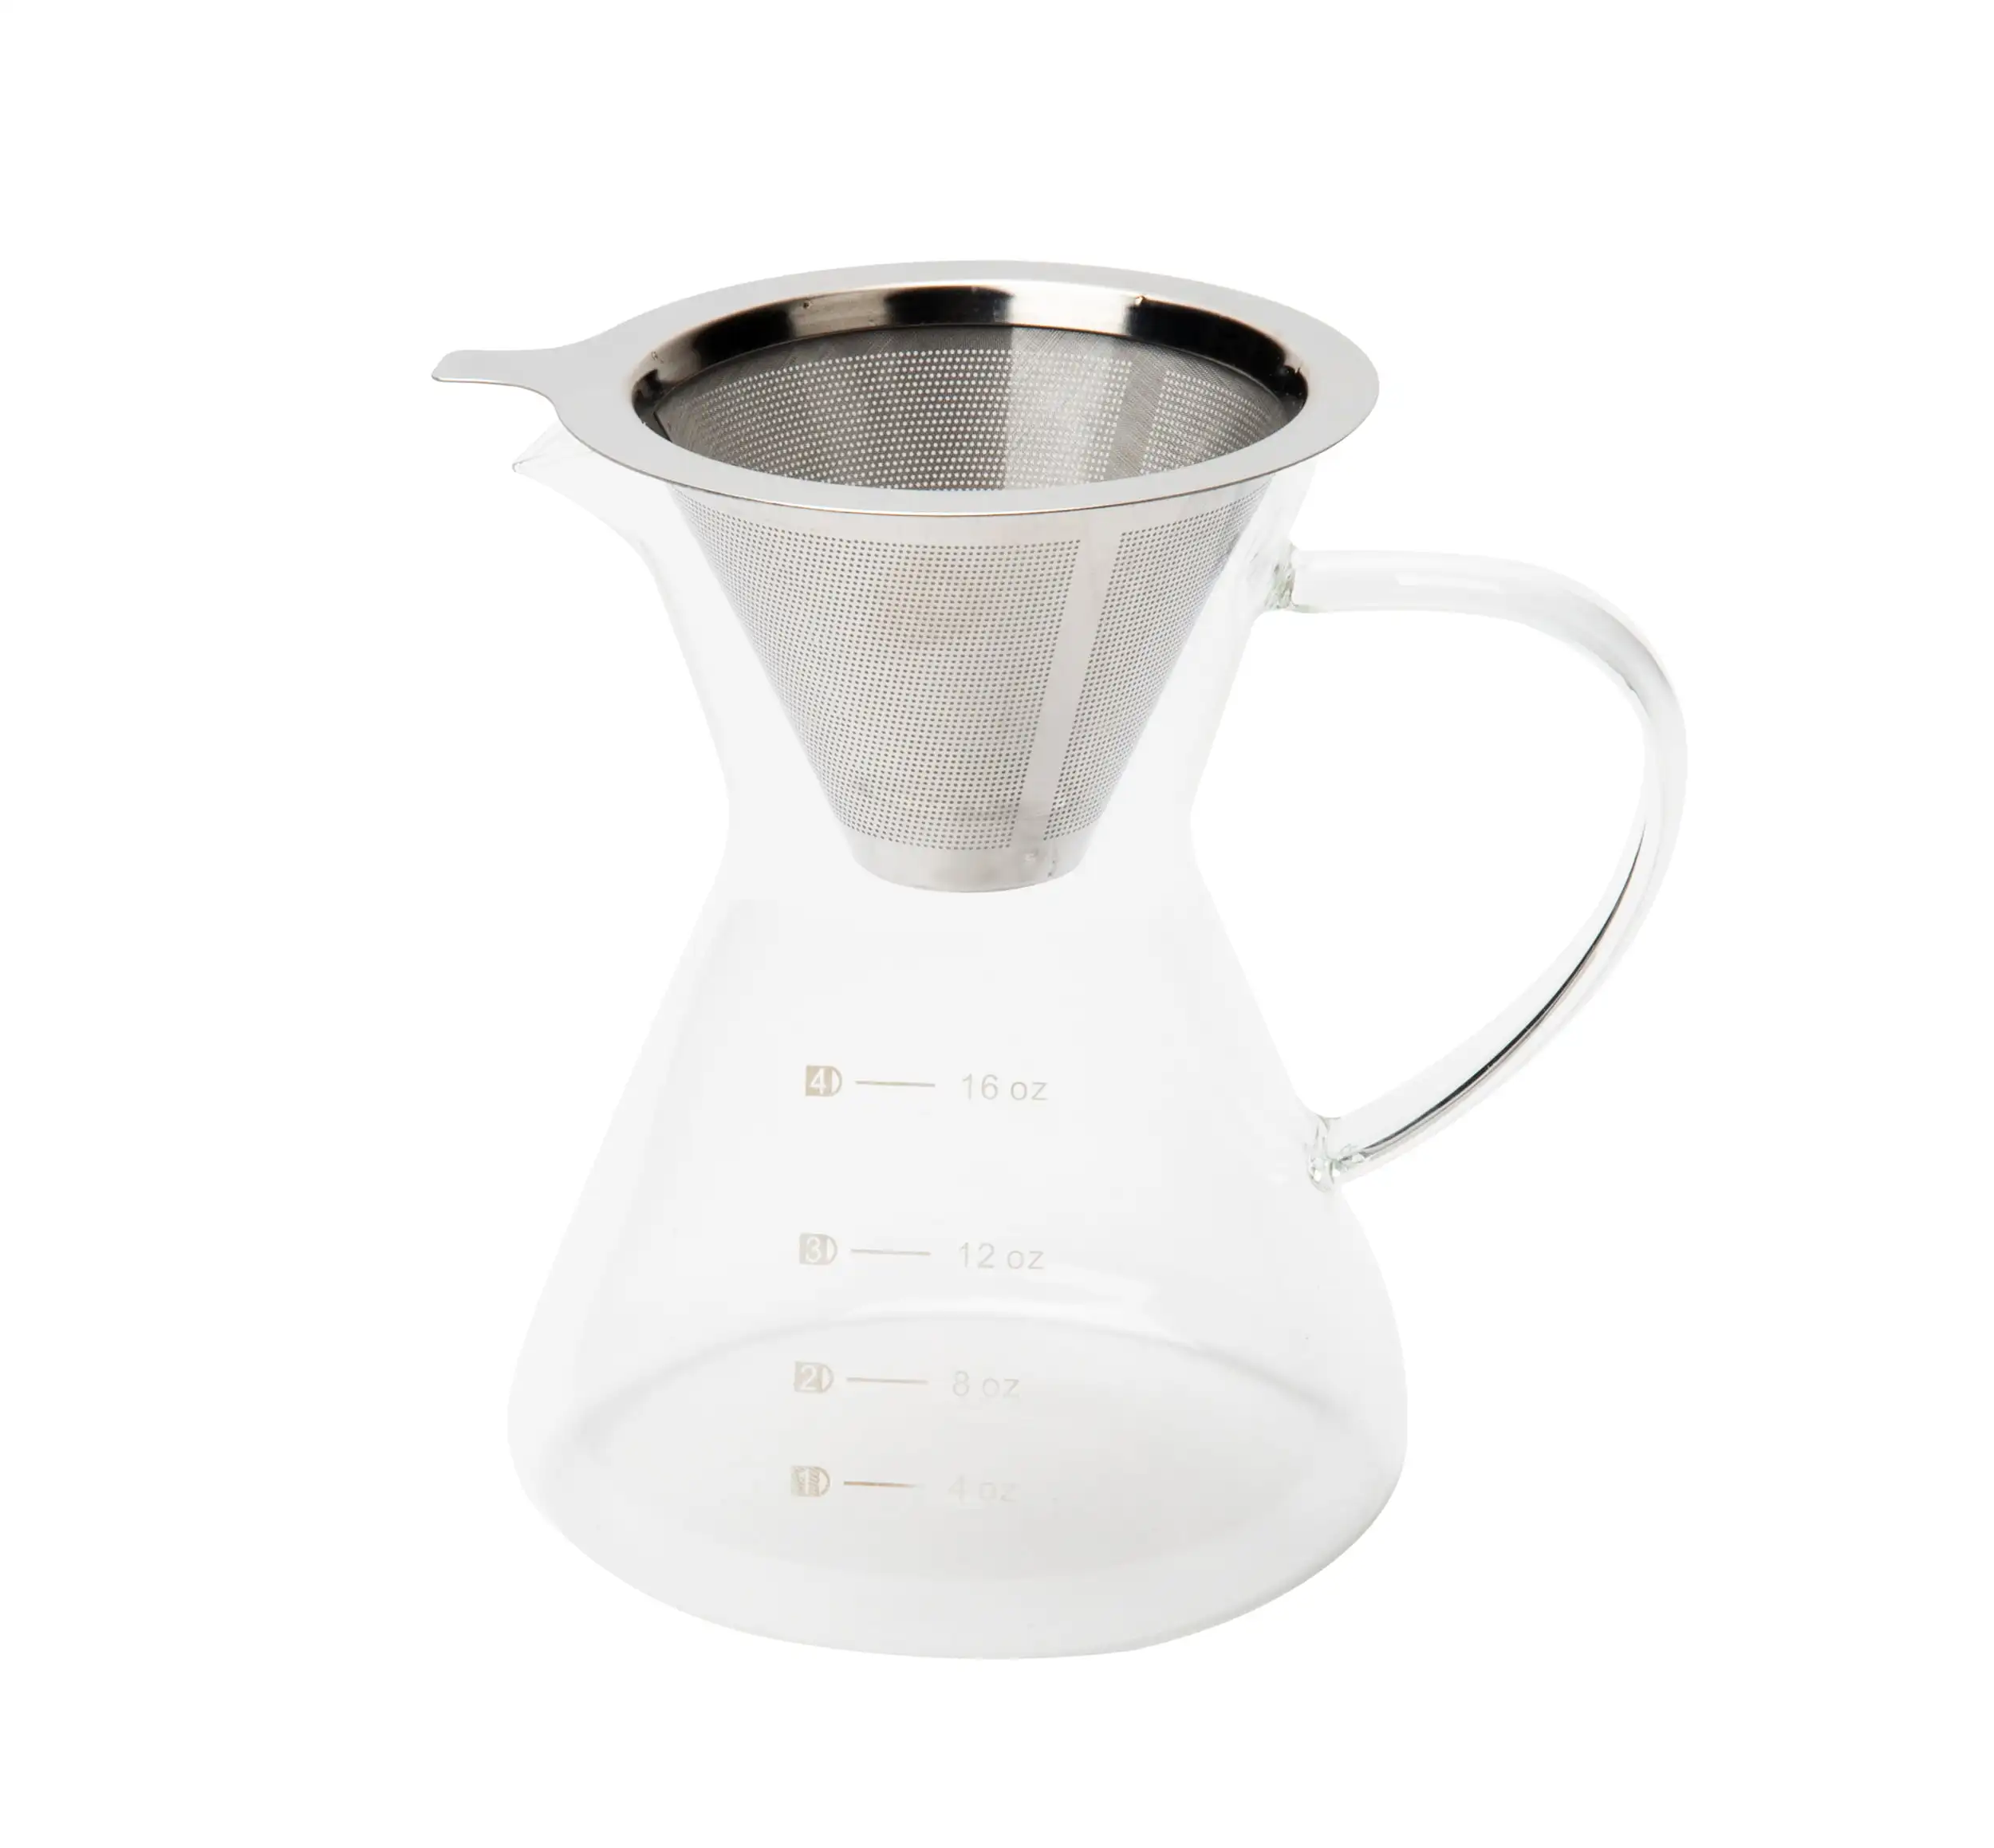 

16 oz Pour Over Coffee Maker with Reusable Stainless Steel Drip Filter, Glass Carafe, Clear